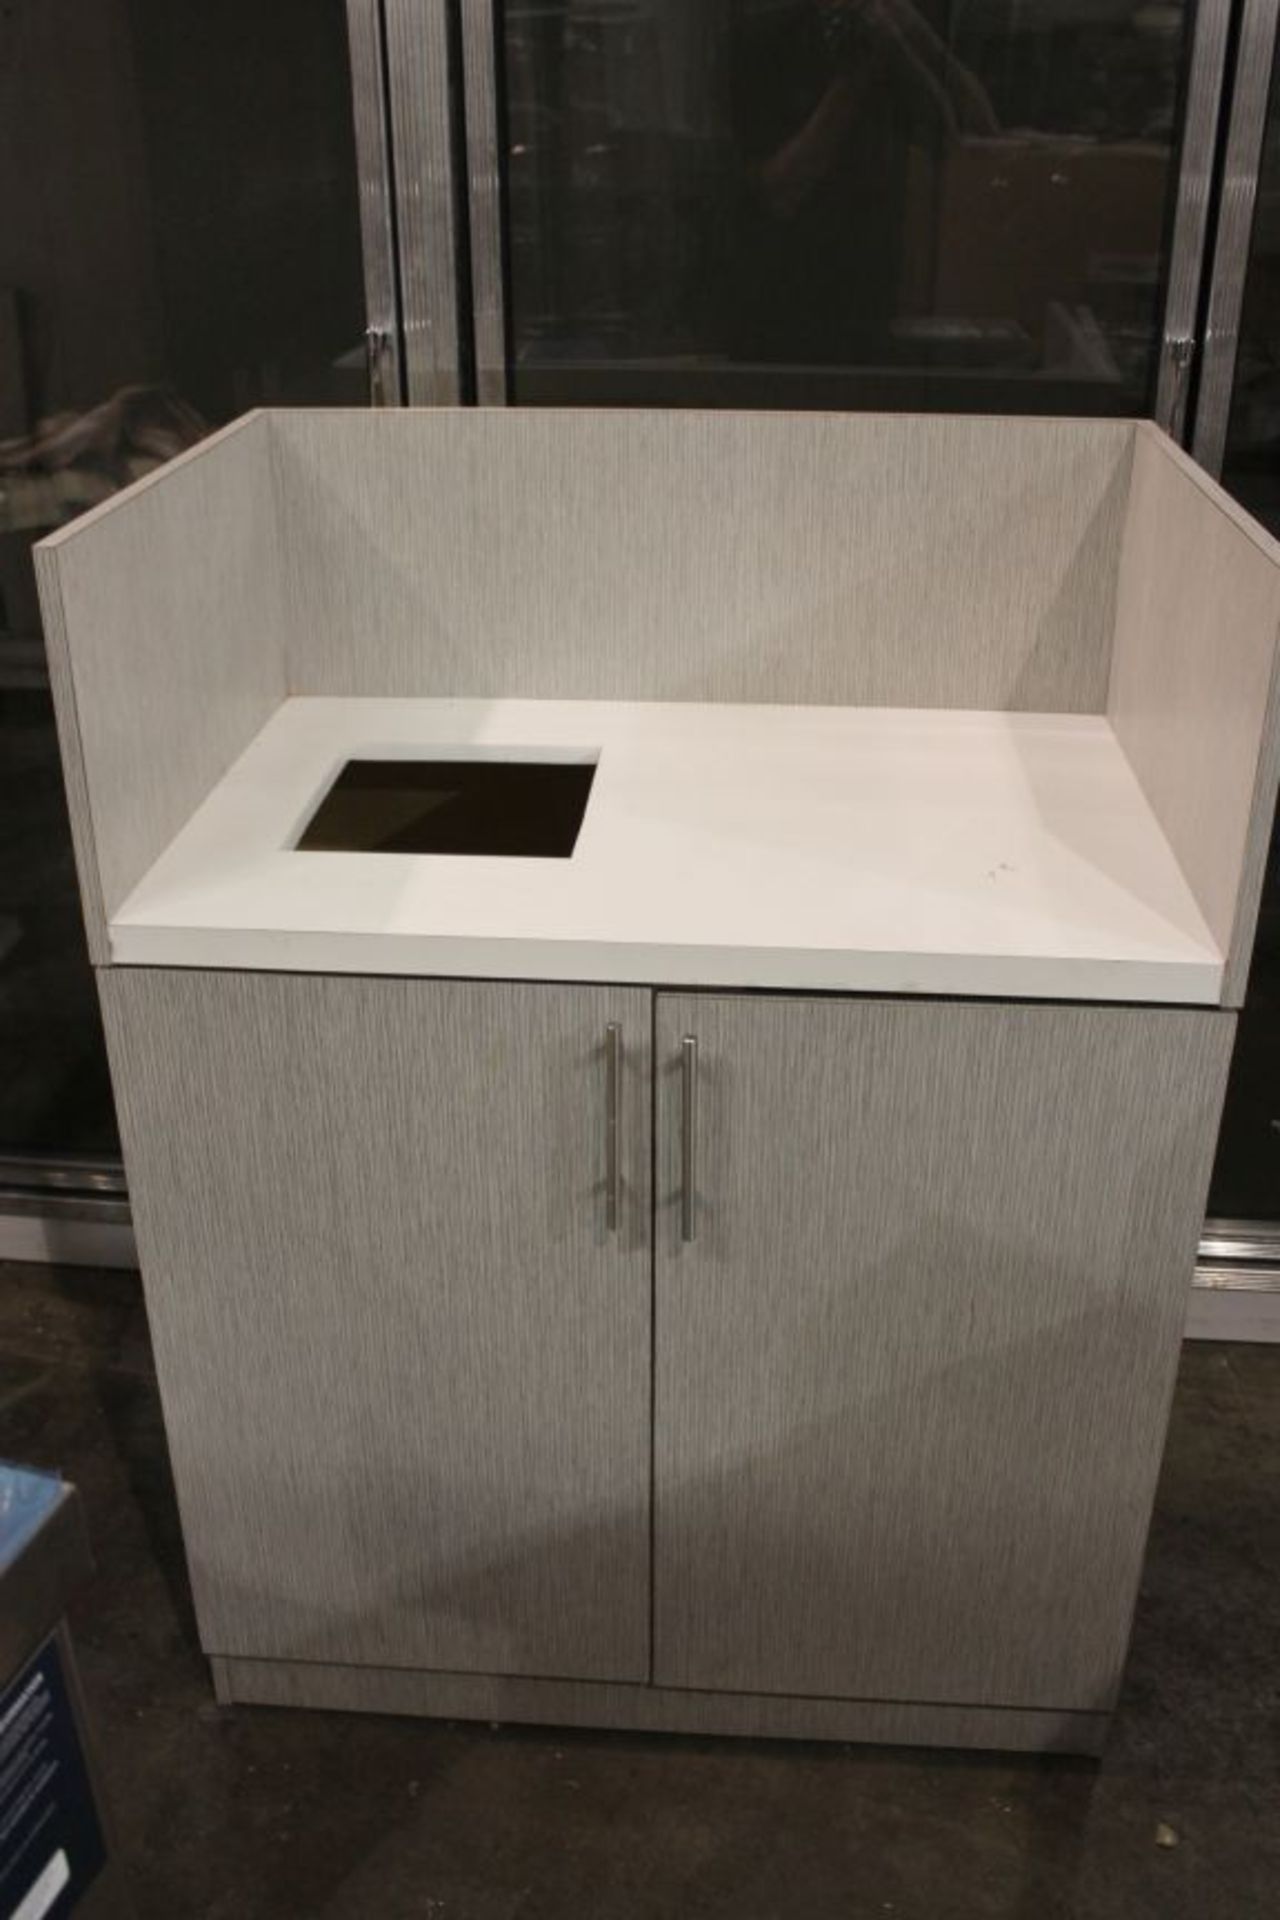 Millwork Waste Station - 36" x 24" x 48" - Image 2 of 3